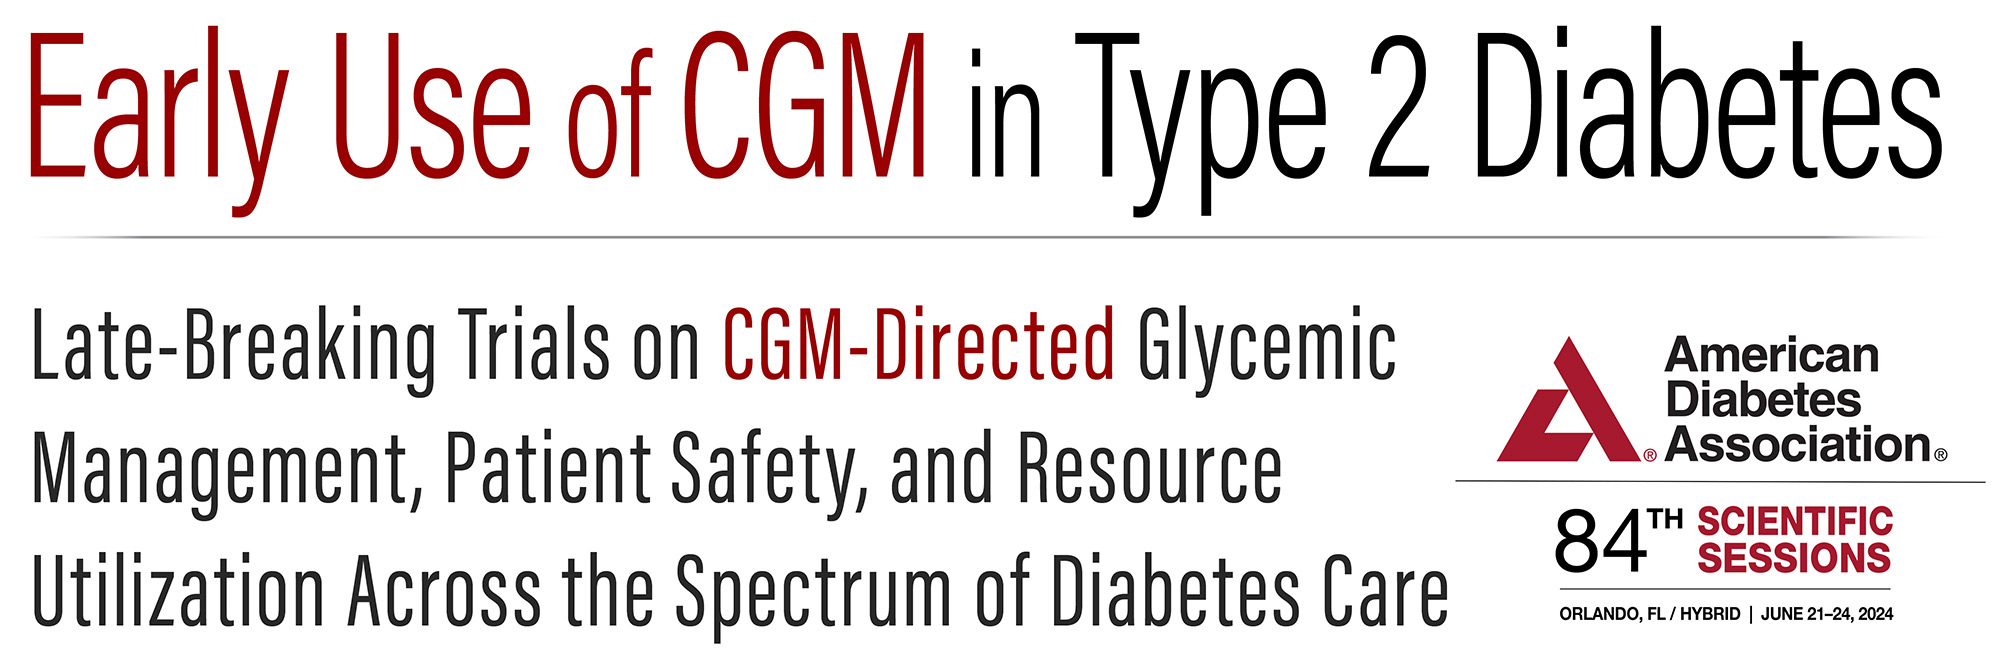 Early Use of CGM in Type 2 Diabetes
Late-Breaking Trials on CGM-Directed Glycemic Management, Patient 
Safety, and Resource Utilization Across the Spectrum of Diabetes Care